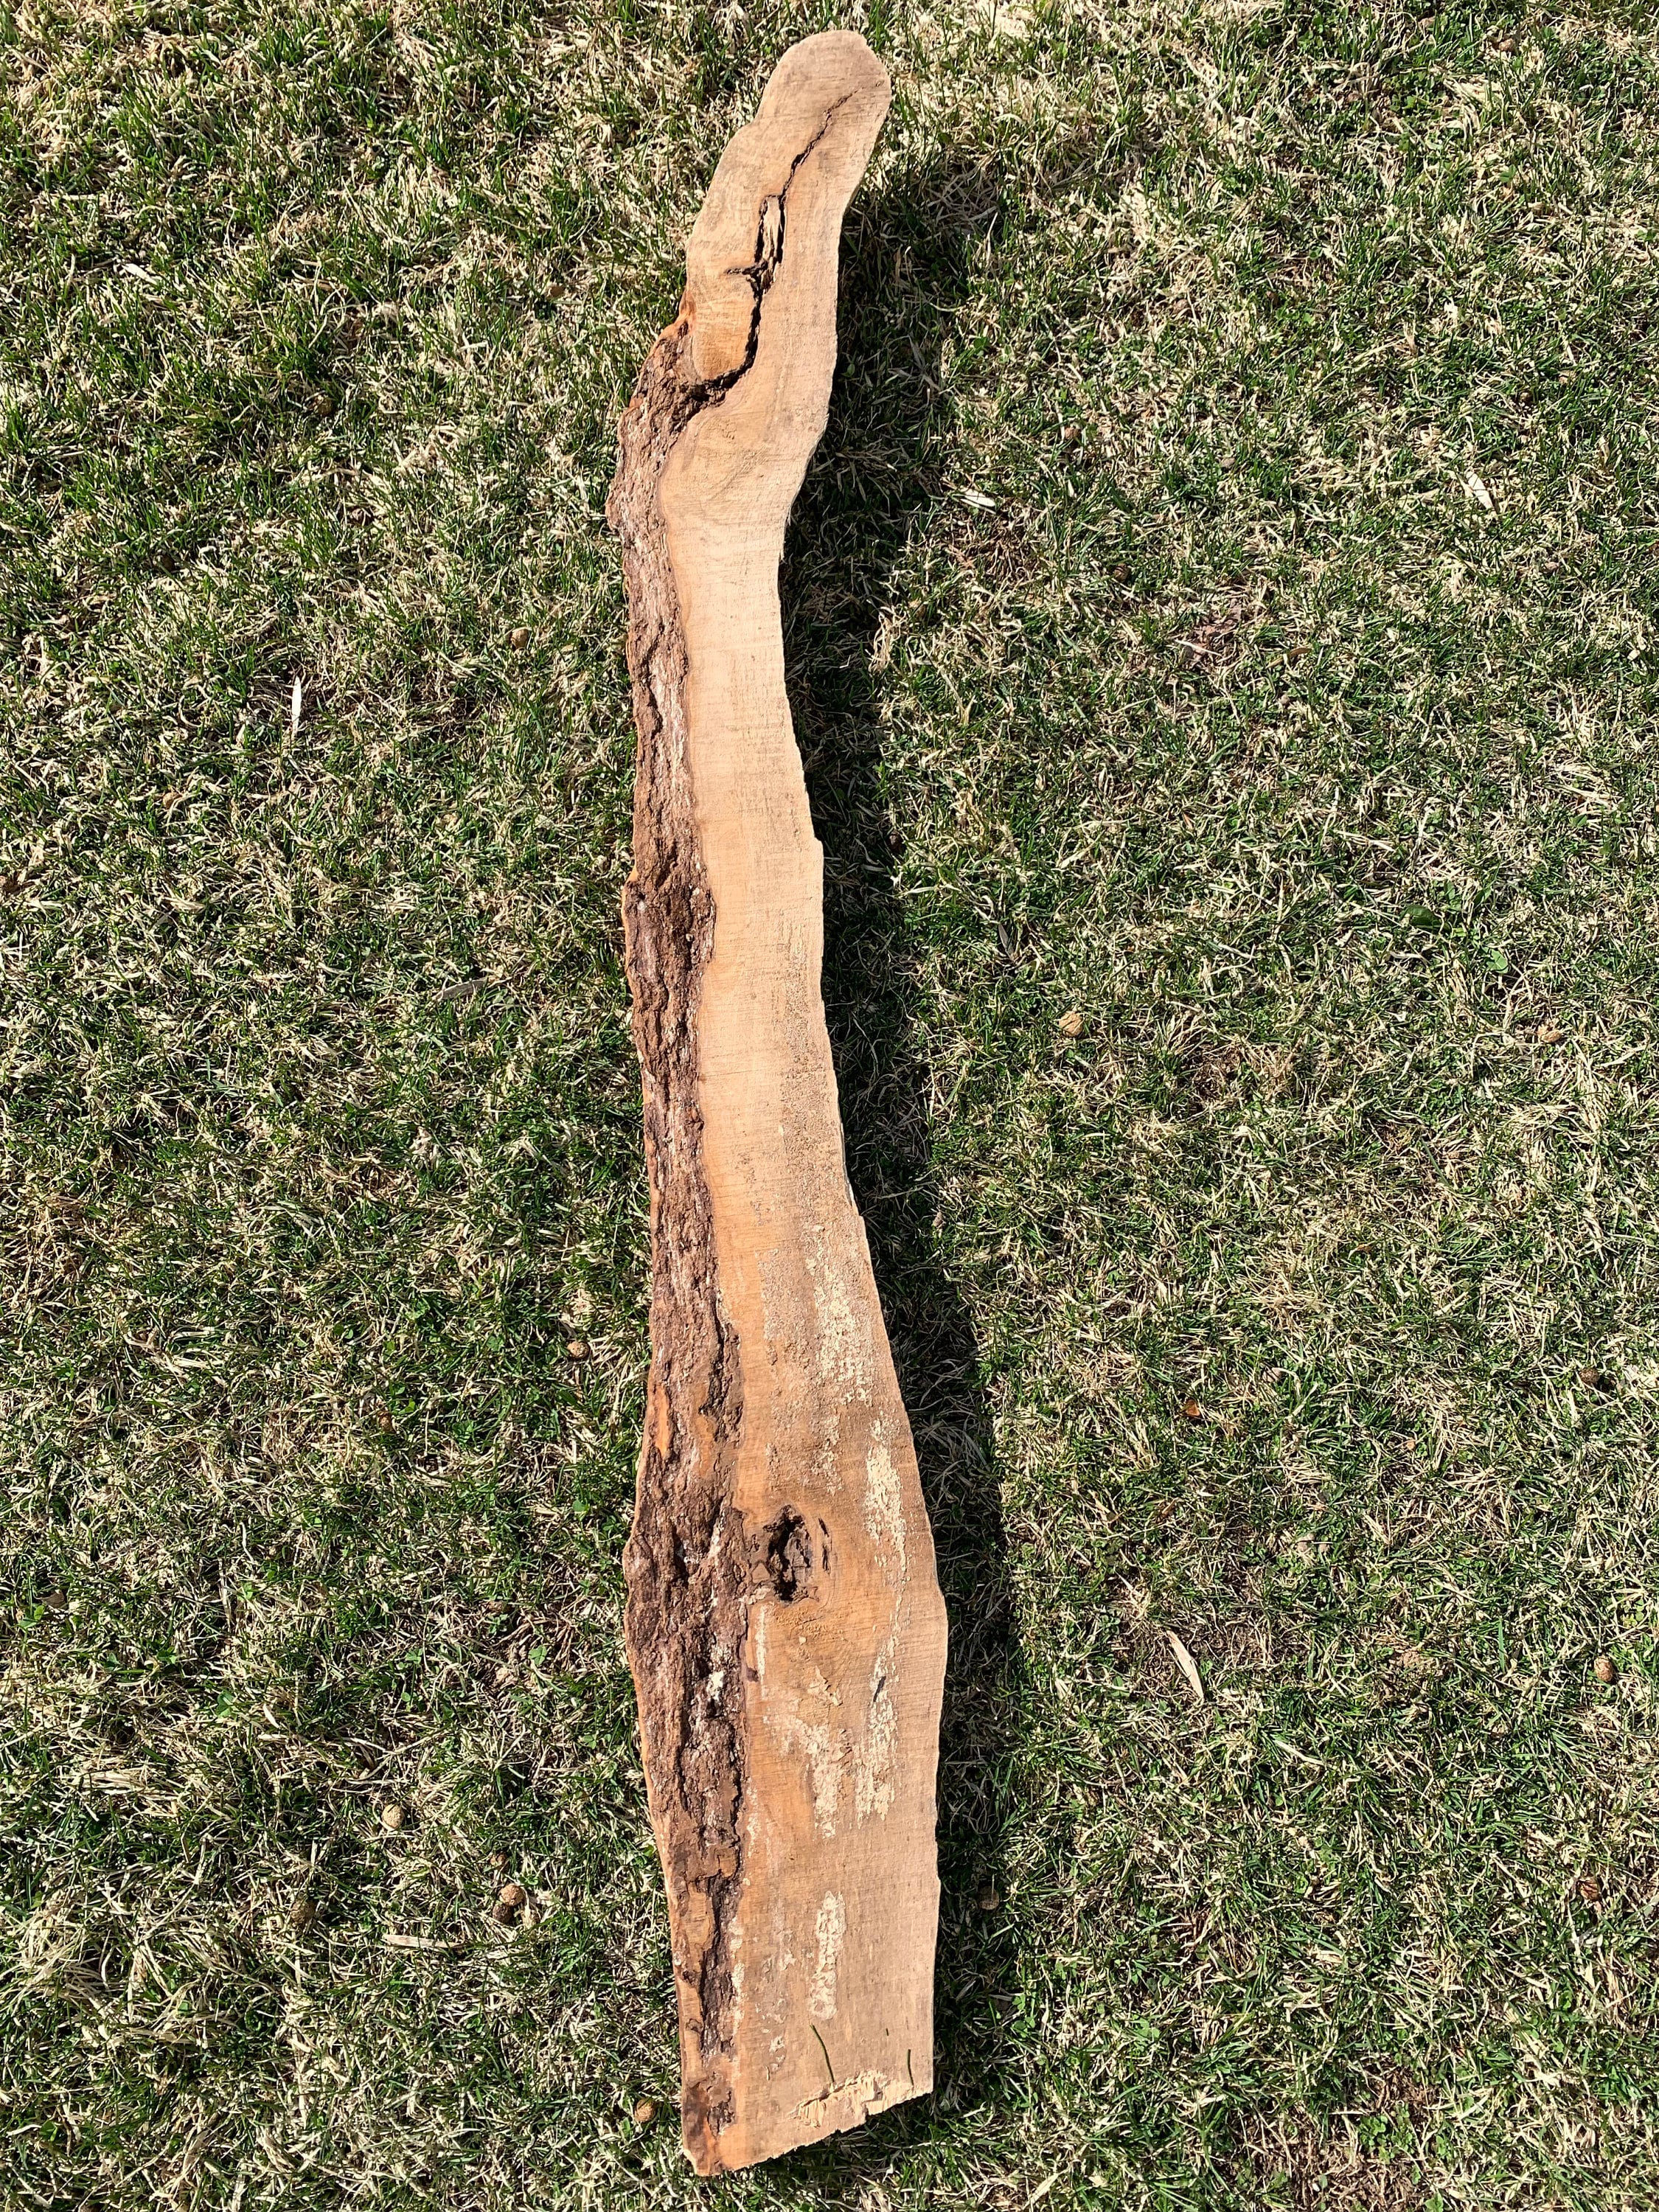 Snake Shape Pine Wood Half Log, Approximately 44 Inches Long by 6 Inches Wide and 1/2 Inches High